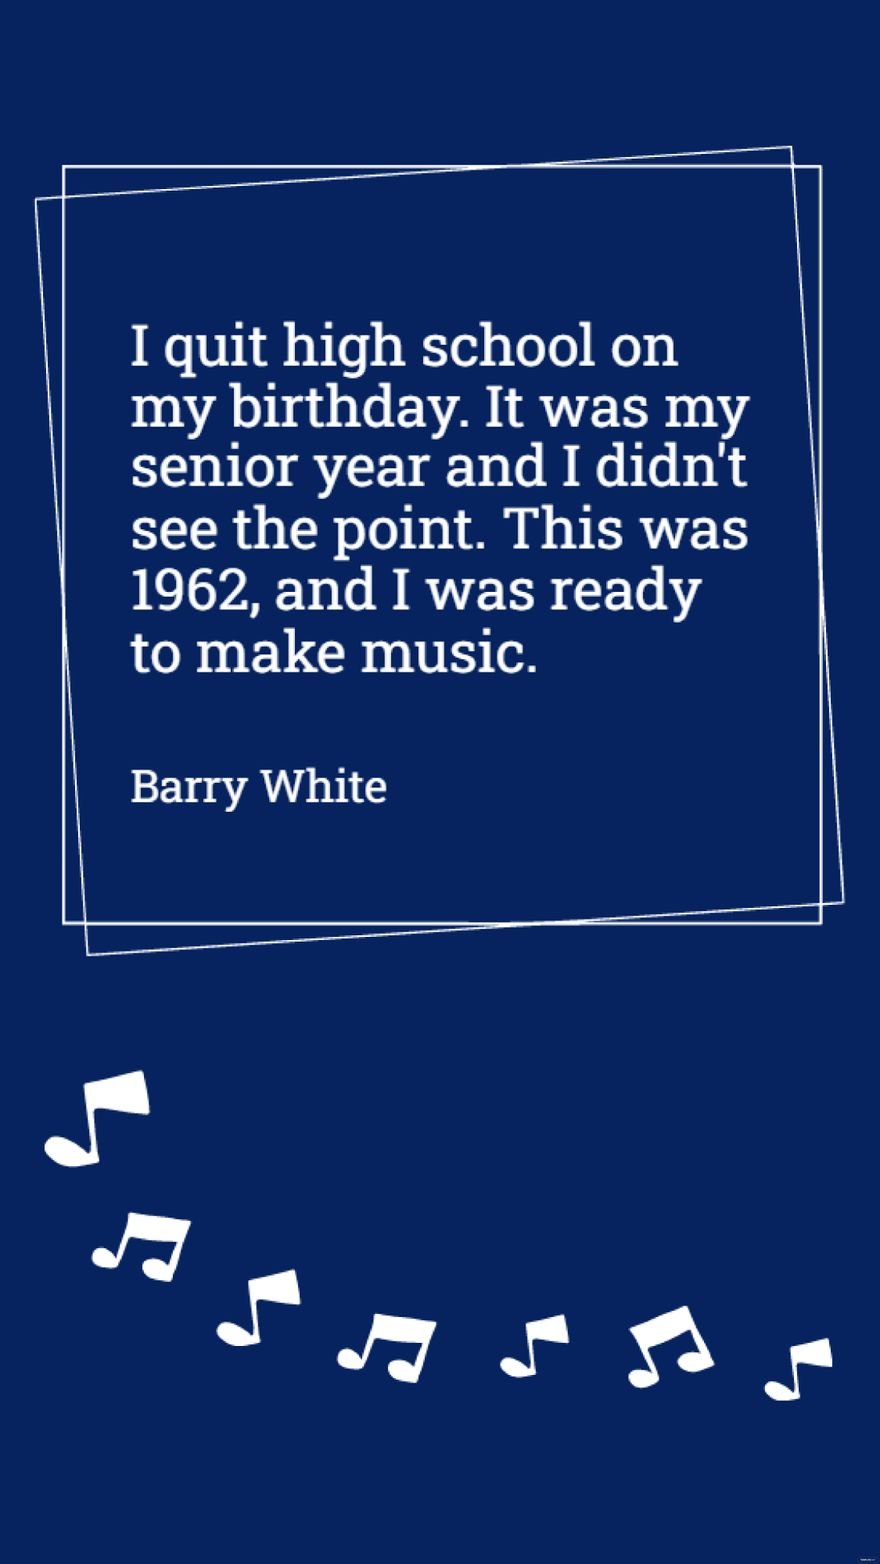 Barry White - I quit high school on my birthday. It was my senior year and I didn't see the point. This was 1962, and I was ready to make music.